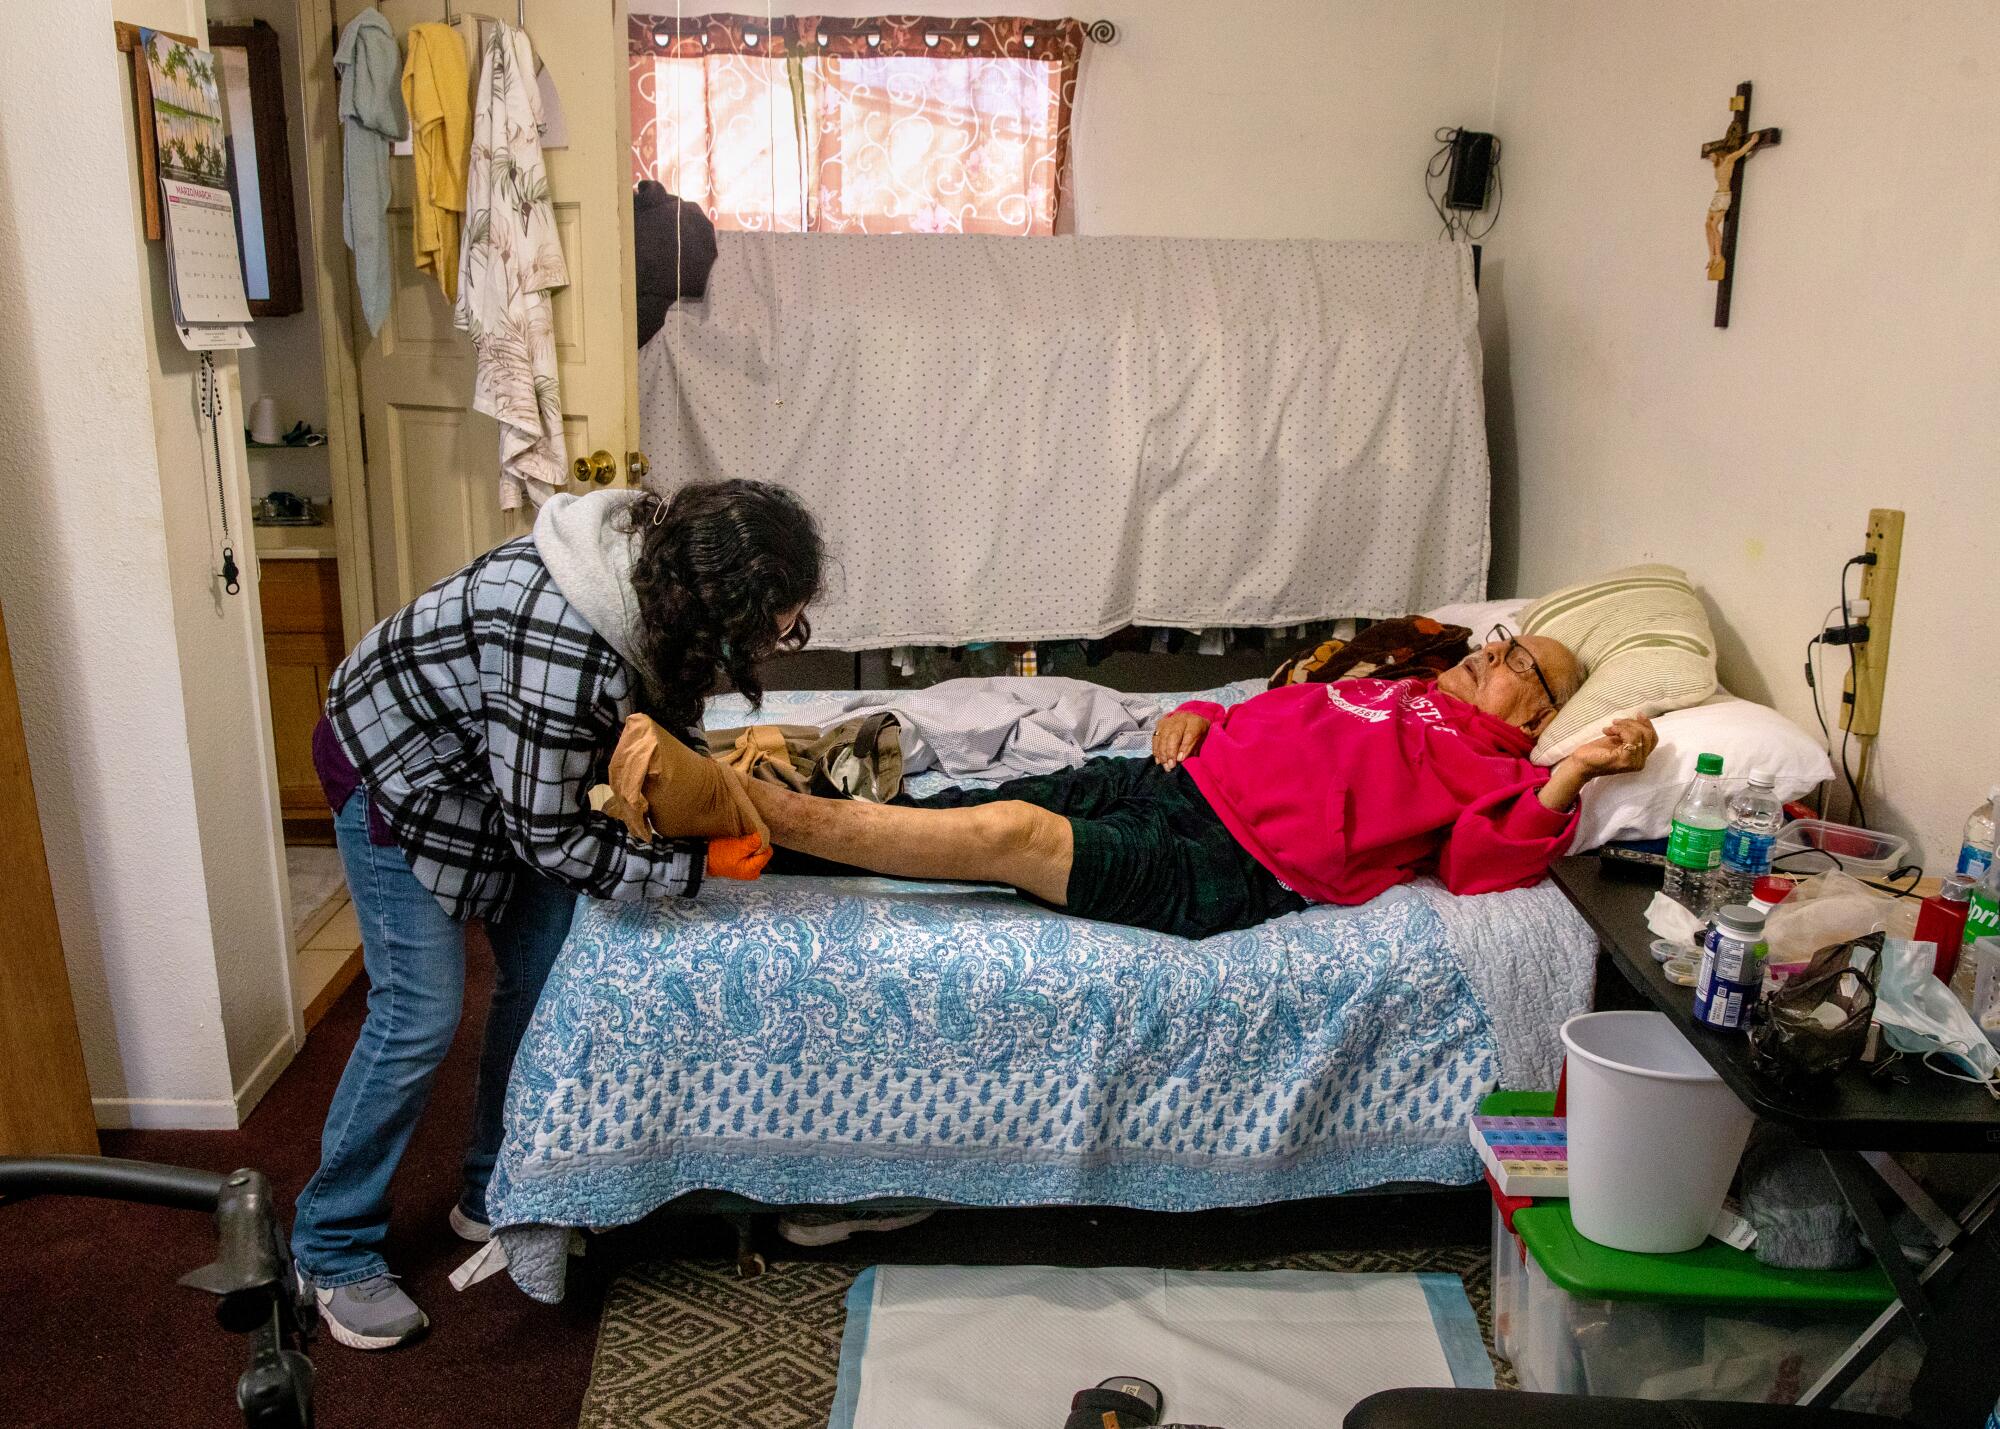 A woman puts compression stockings on an elderly man lying on a bed.